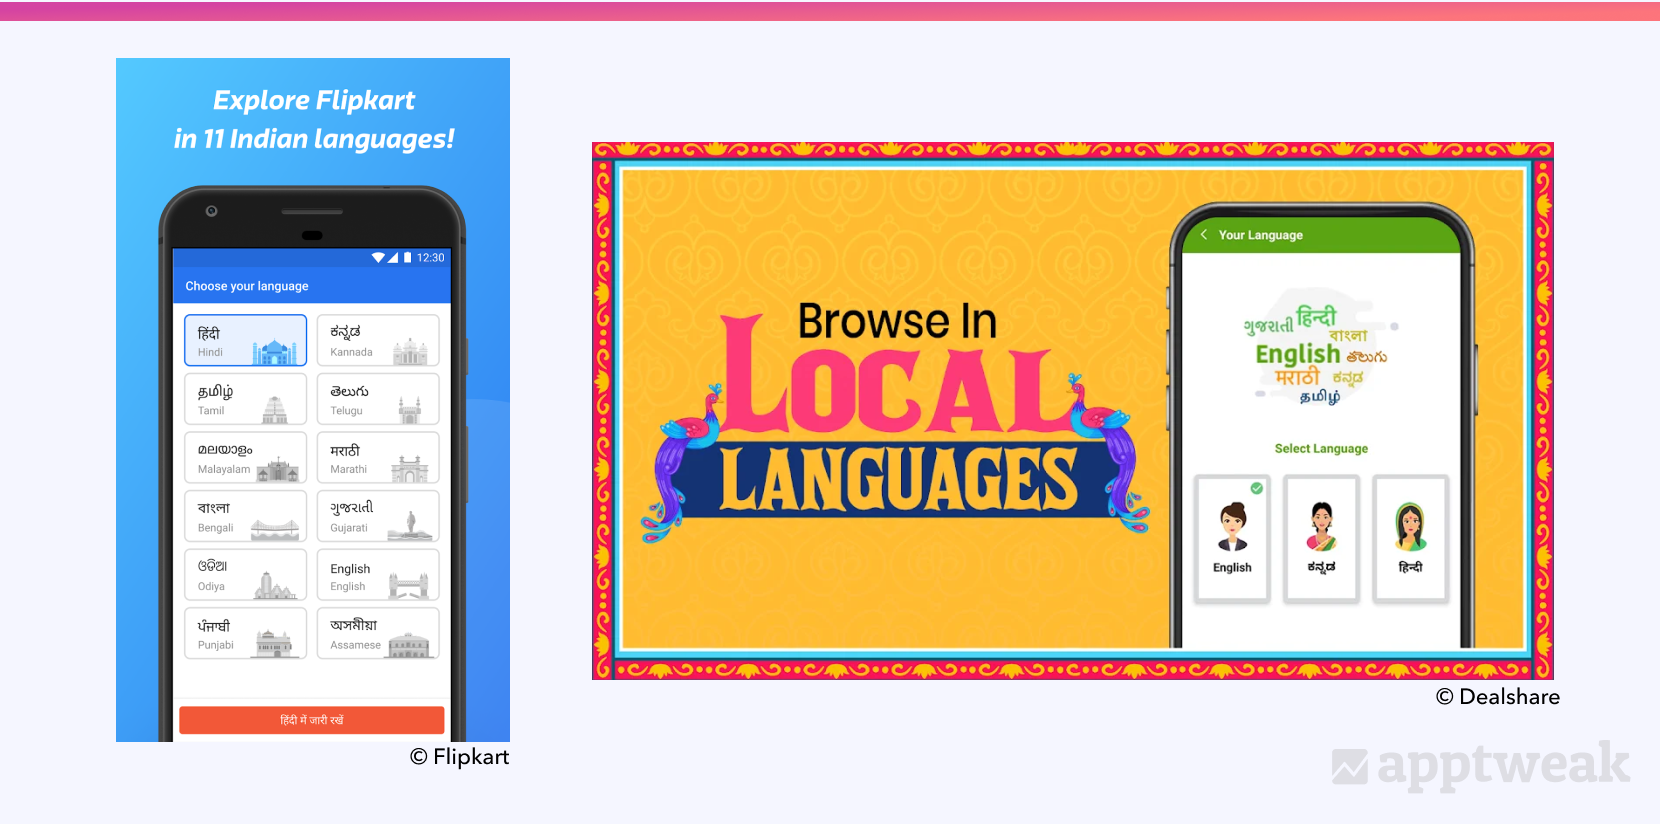 Flipkart and Dealshare highlight the accessibility of their app in local languages on their screenshots